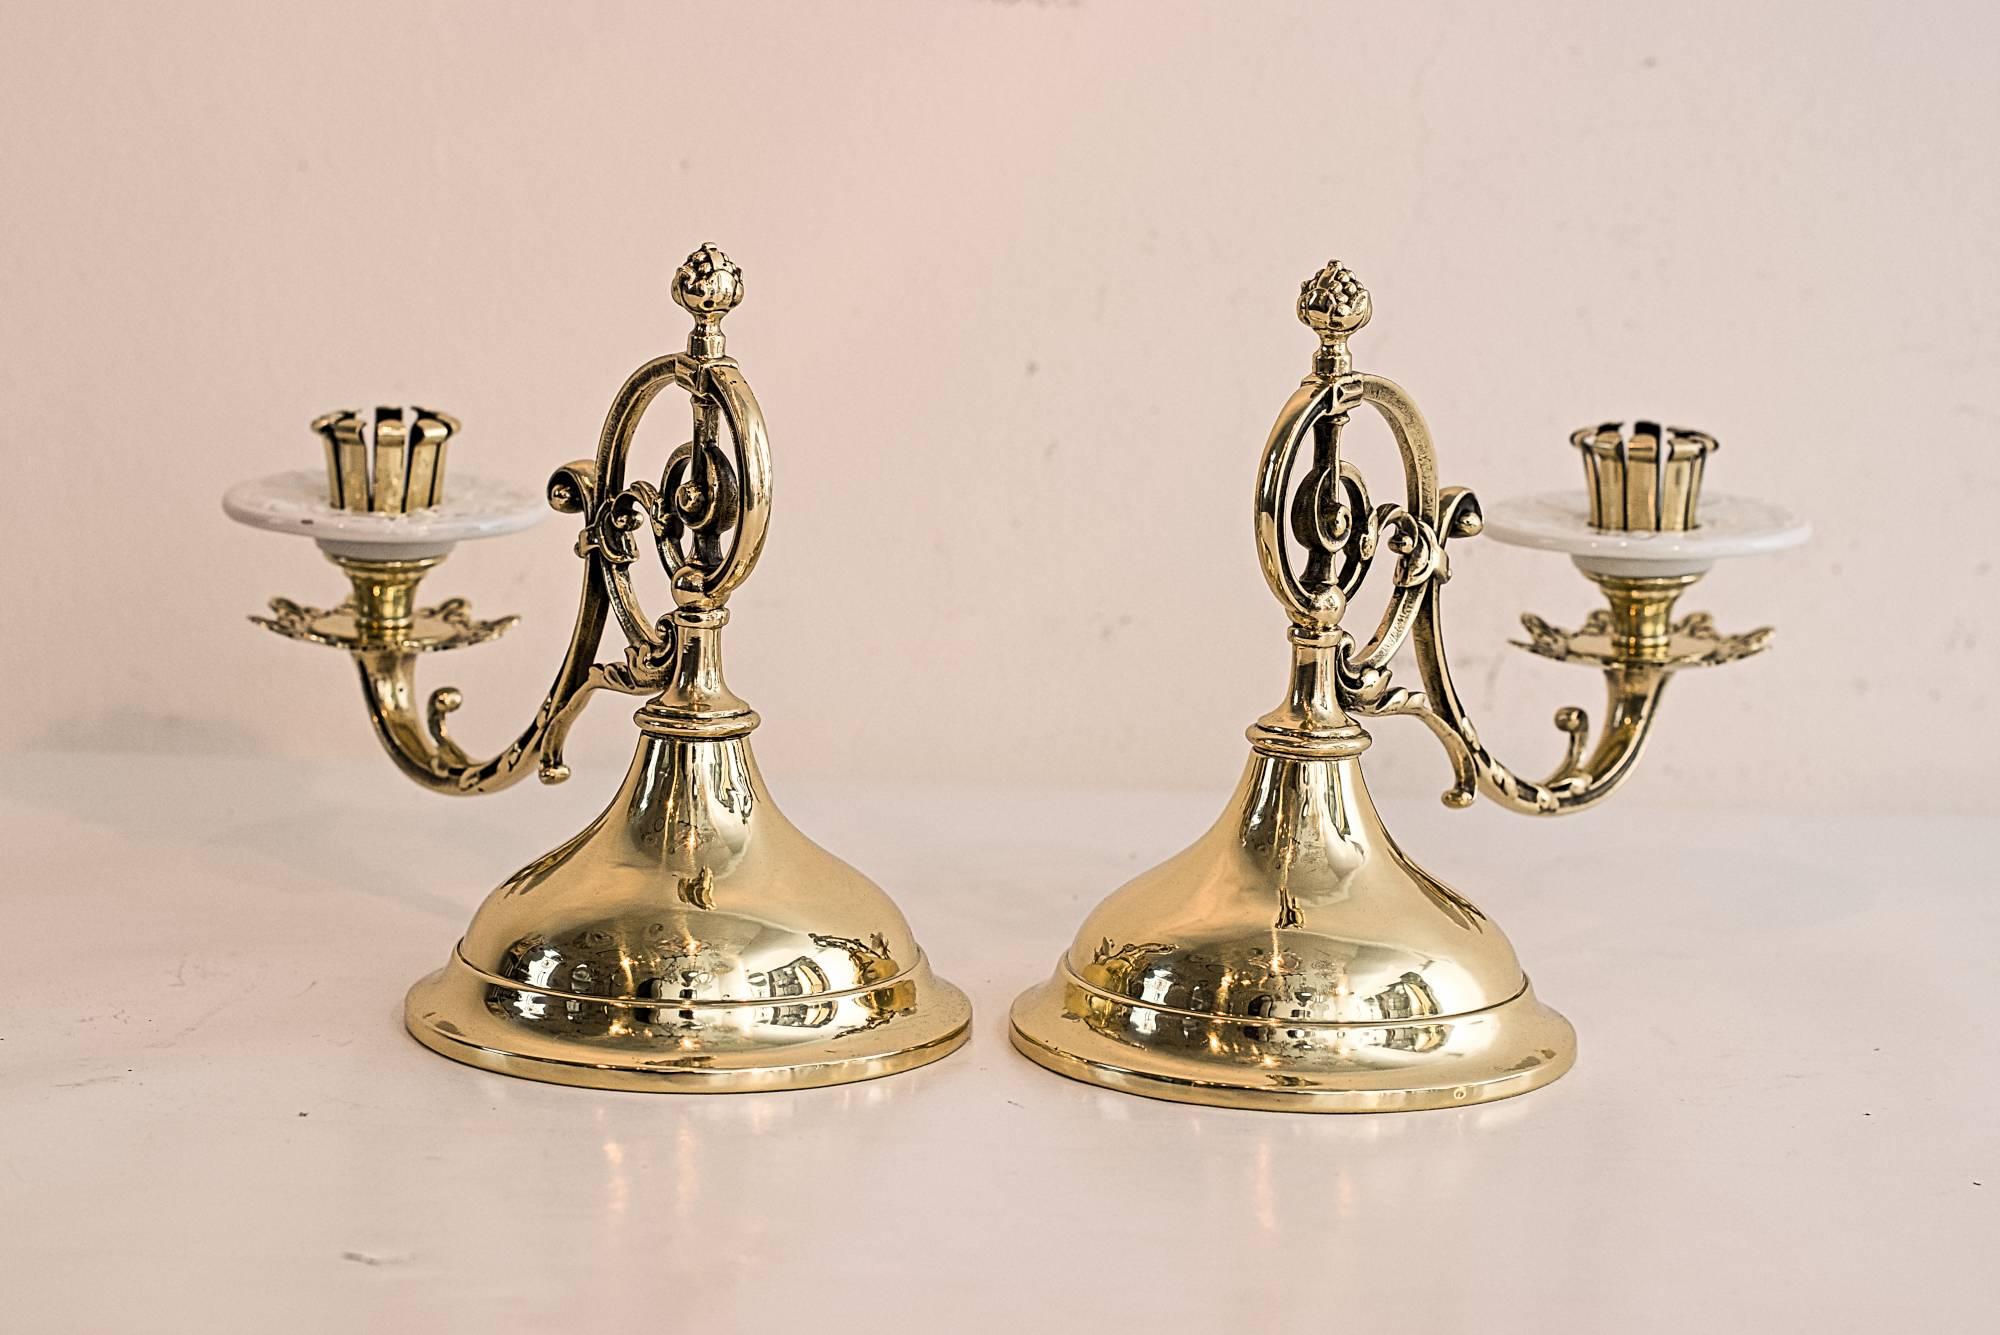 Two historic candleholder.
Polished and stove enamelled.